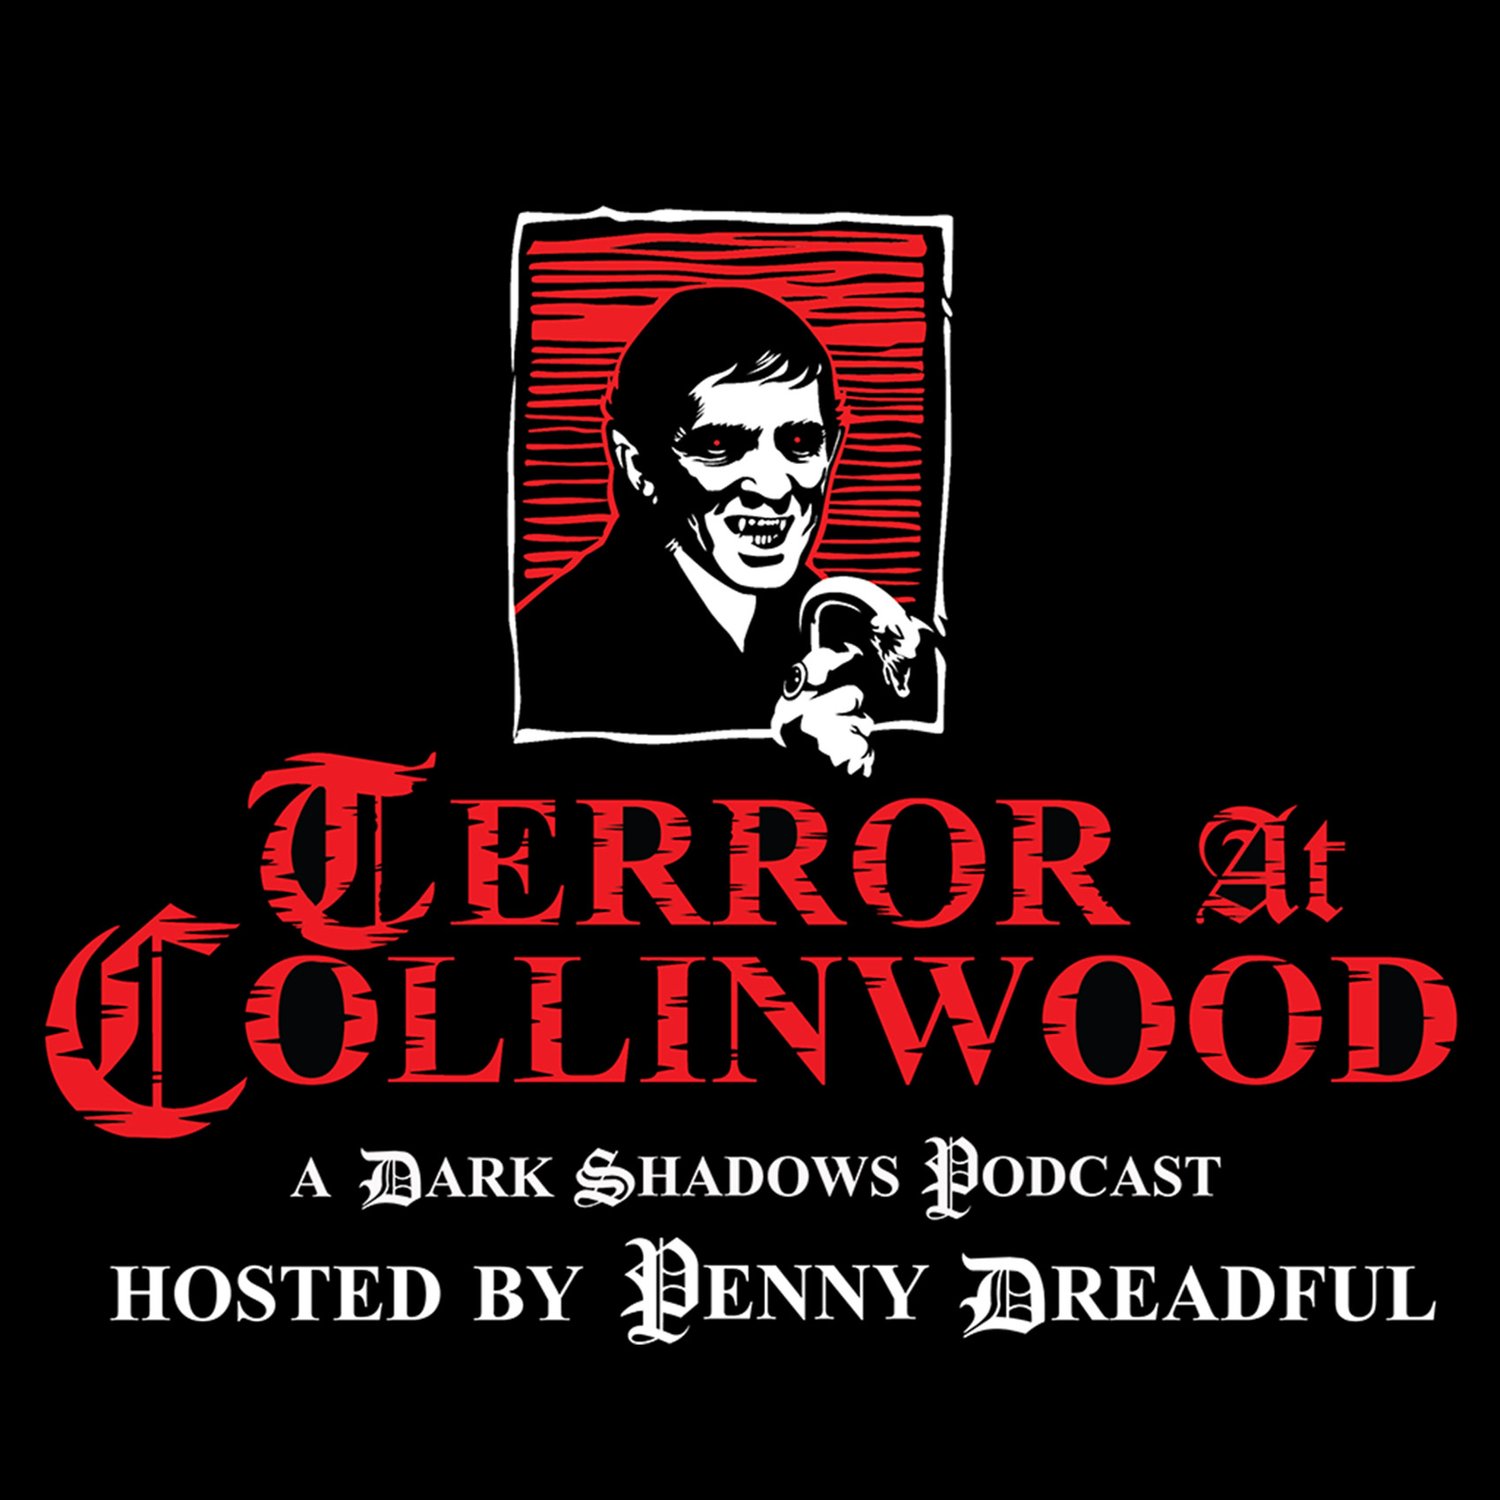 Terror at Collinwood Episode 66: Dark Shadows & Pop Culture with Jim Beard, Rich Handley, and Charles R. Rutledge